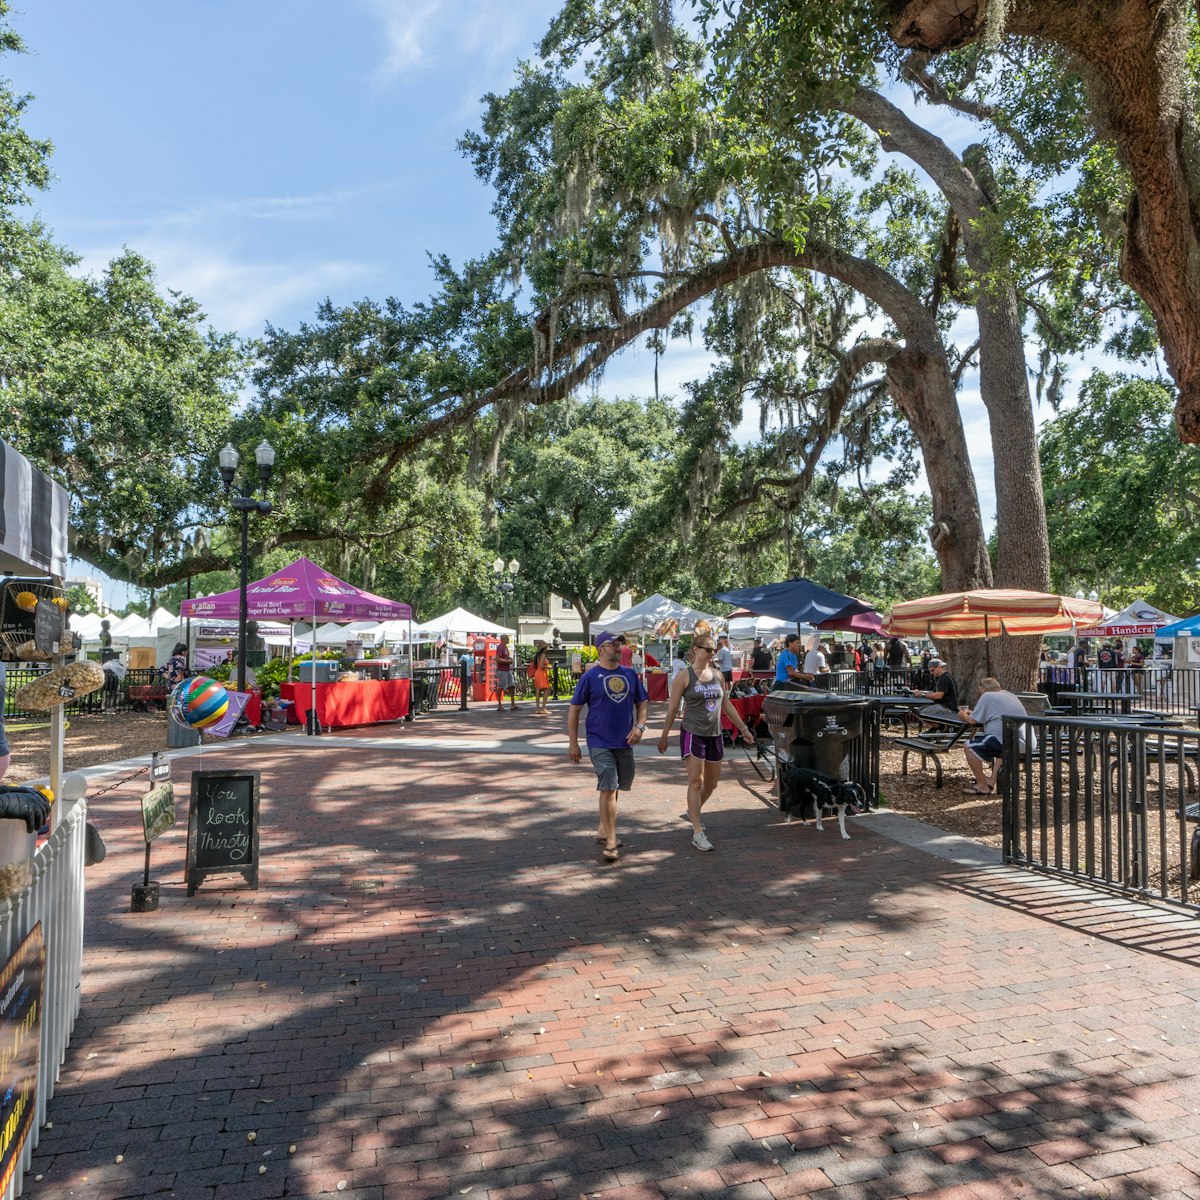 Orlando, Florida - June 17, 2018 Lake Eola Park is a beautiful setting for the Farmers Market every sunday
1127139065
attraction, business, city, commerce, culture, farmers market, florida, food, lake eola, leisure, locals, market, park orlando, people, shop, street, tents, tourism, tourist, town, travel, trees